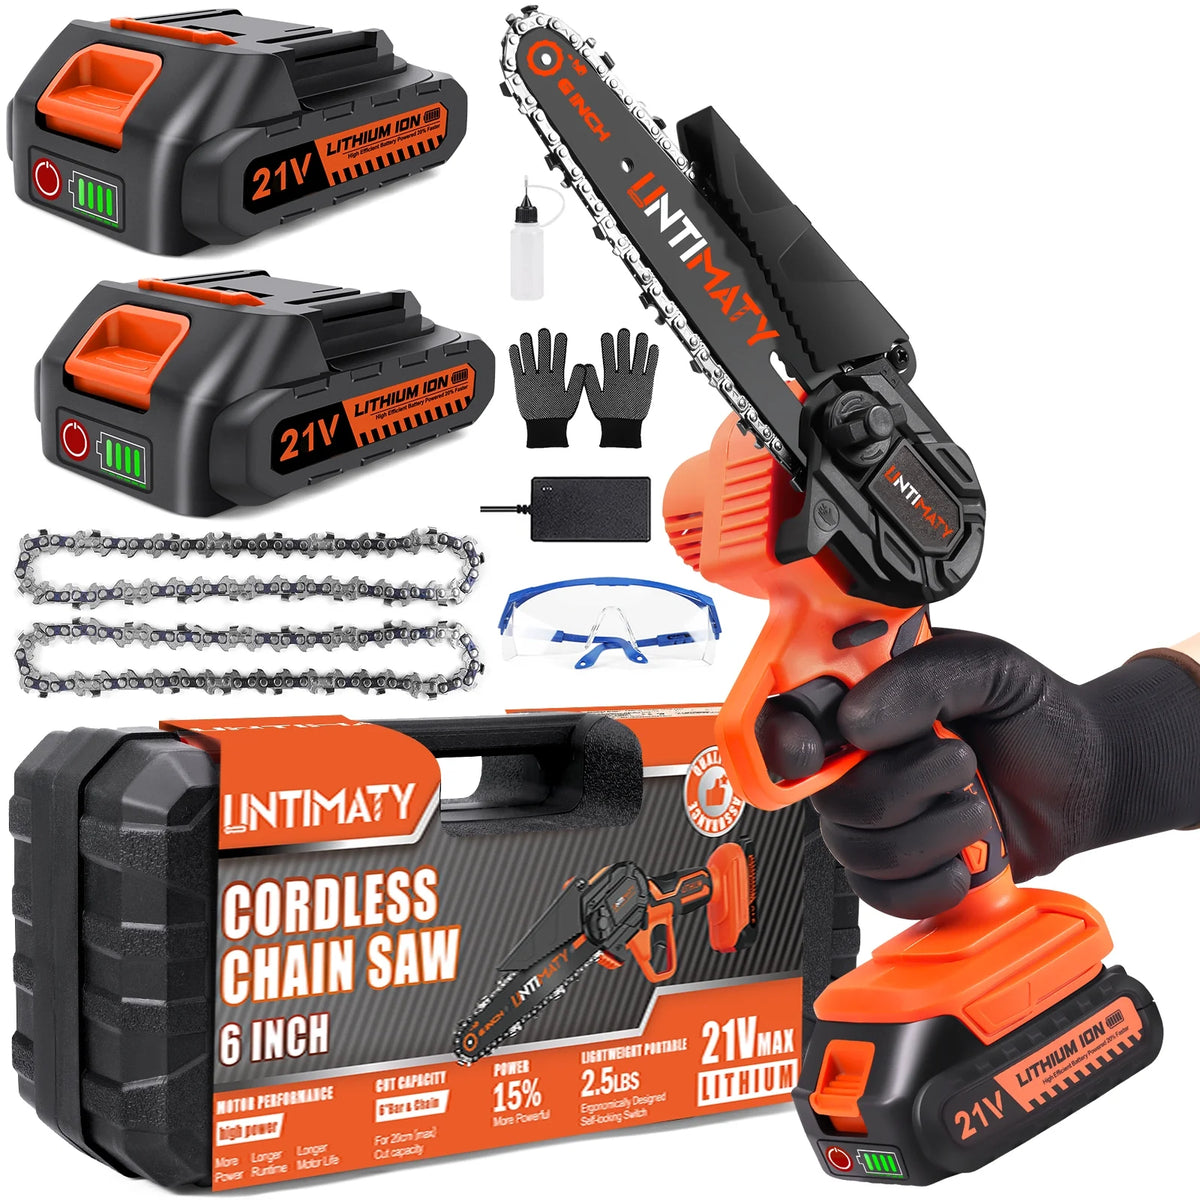 6" Mini Chainsaw Cordless with 2 Batteries & 2 Chains for Wood Cutting